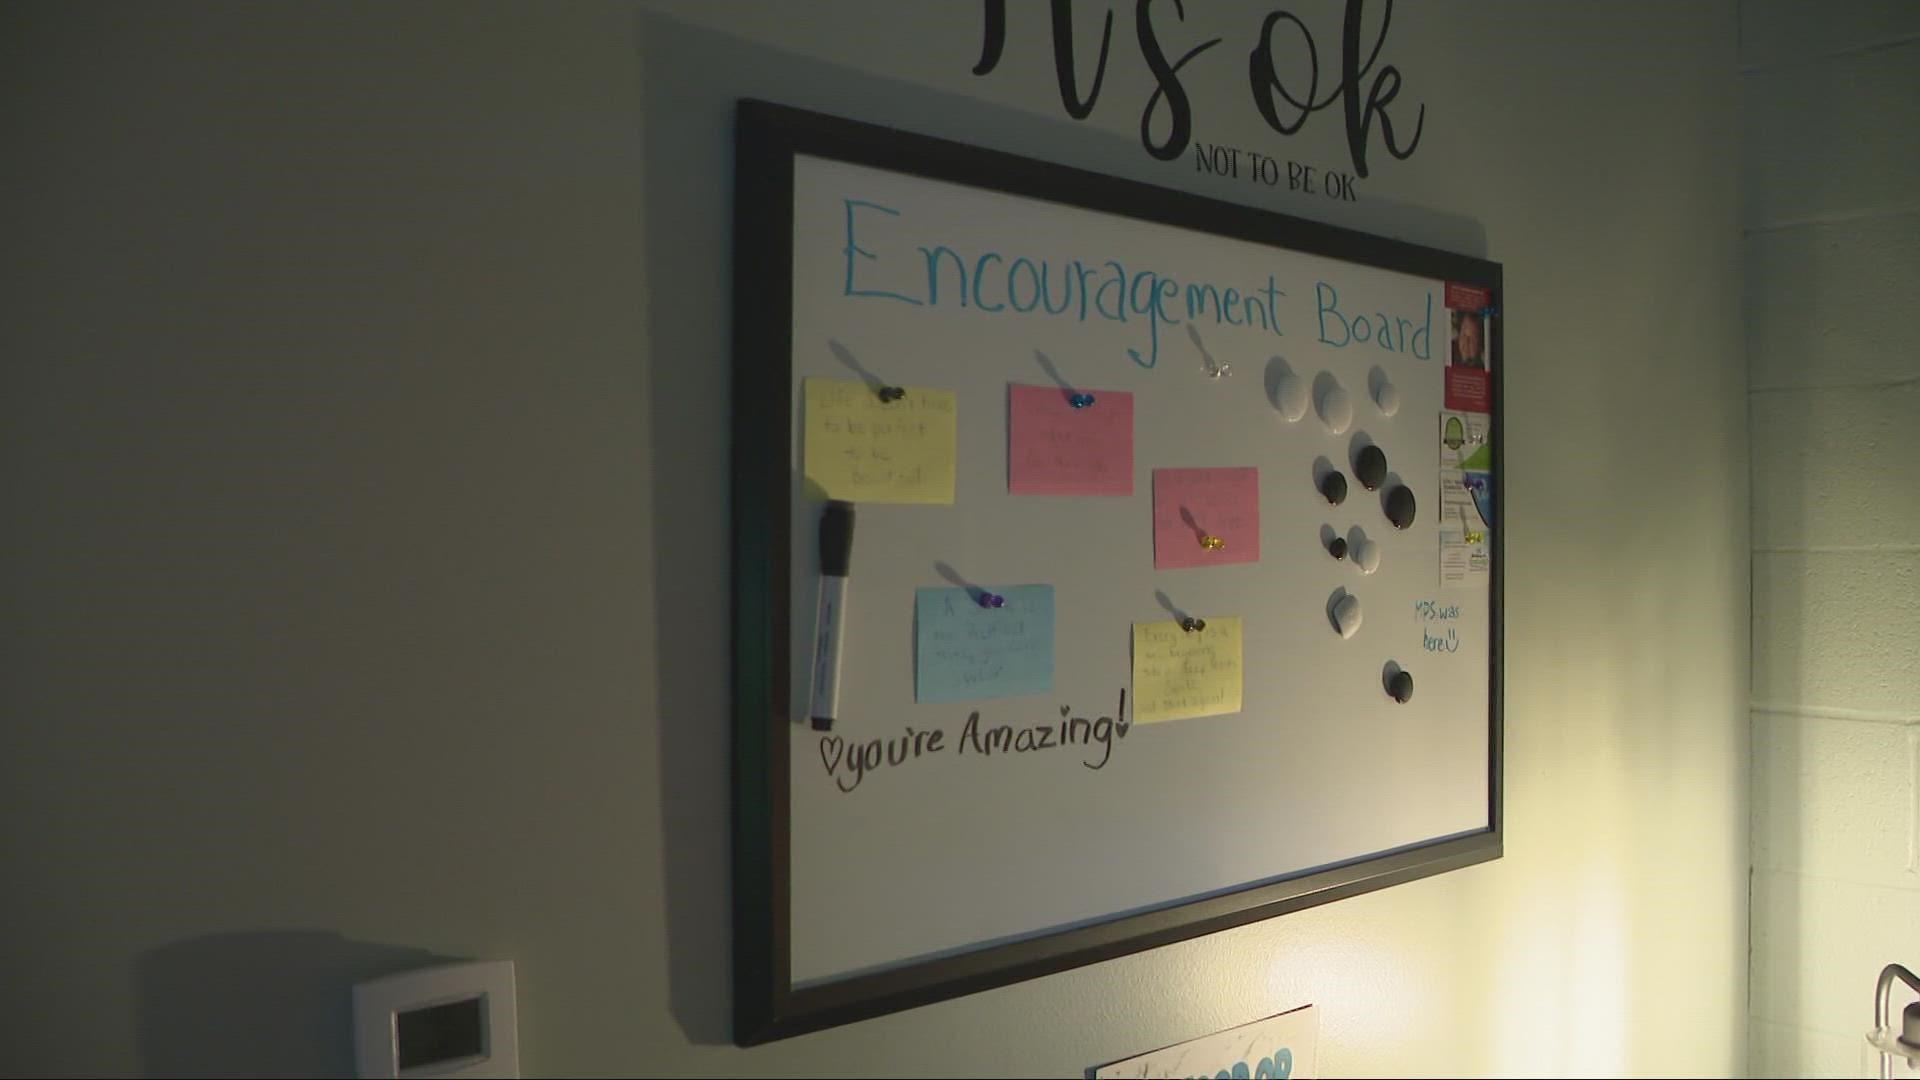 3News' Hollie Strano gives an update on how school districts in Northeast Ohio are bringing special rooms to help students with mental health.